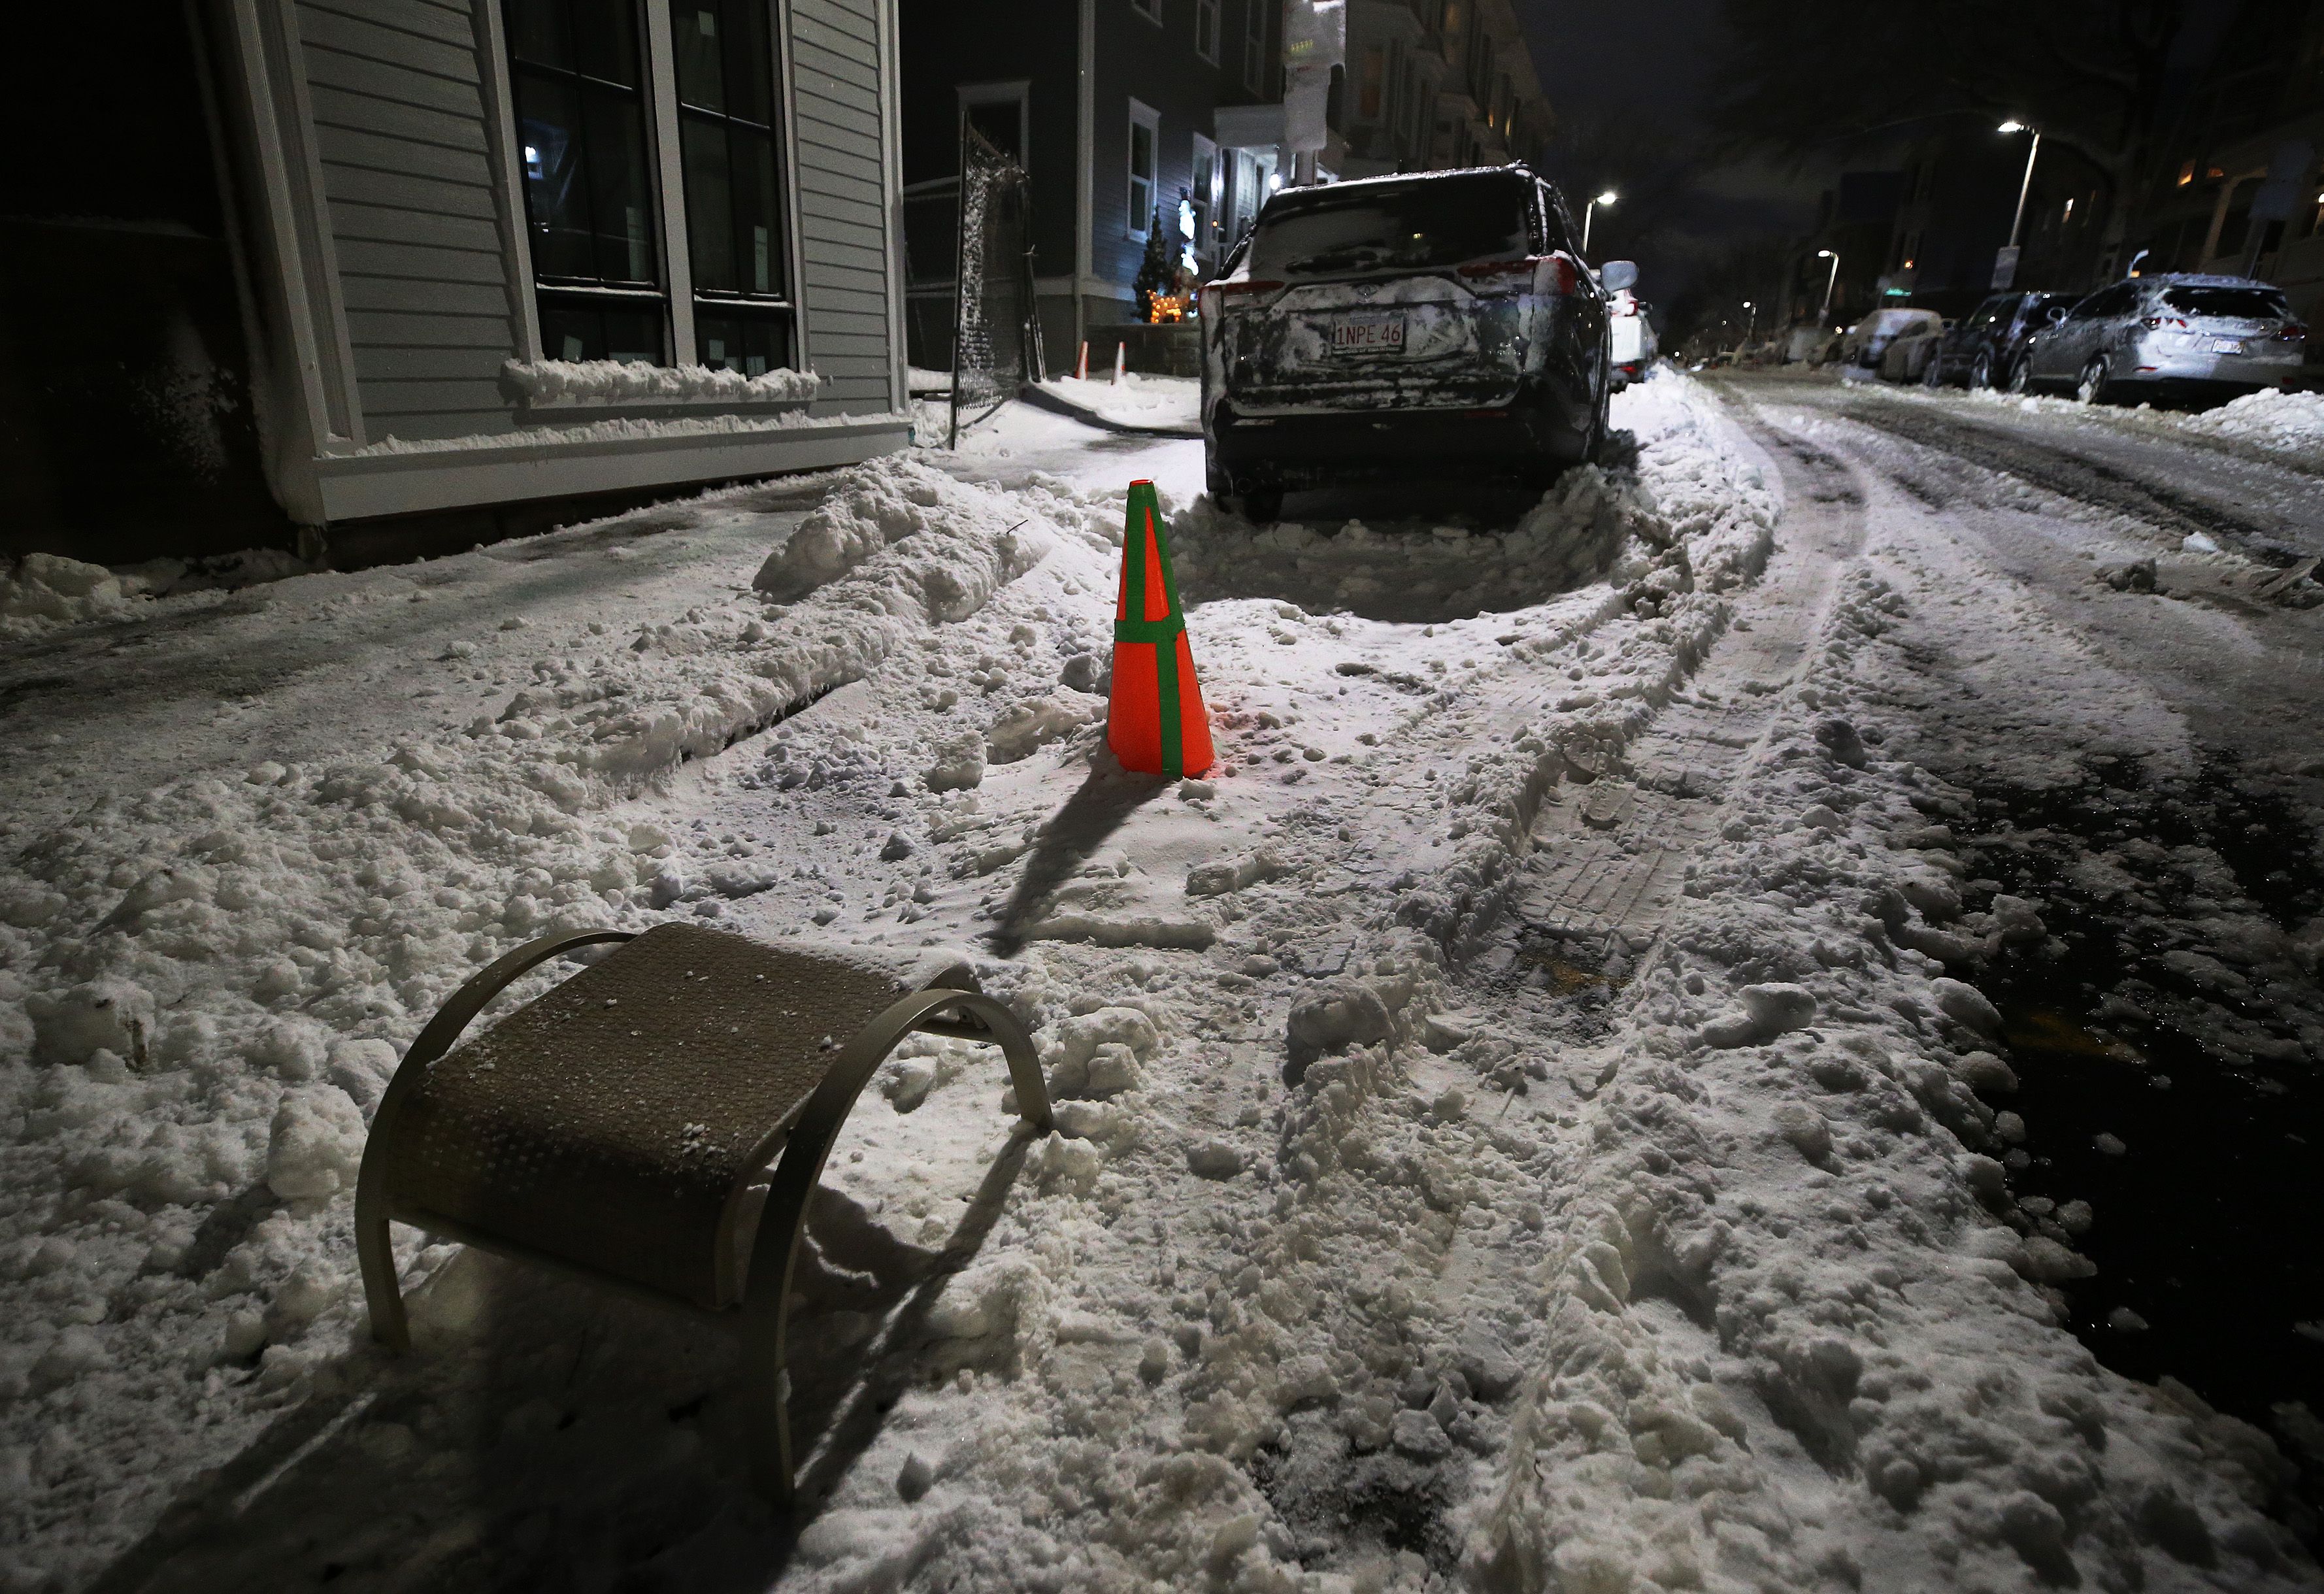 4 things to know about space savers in Boston